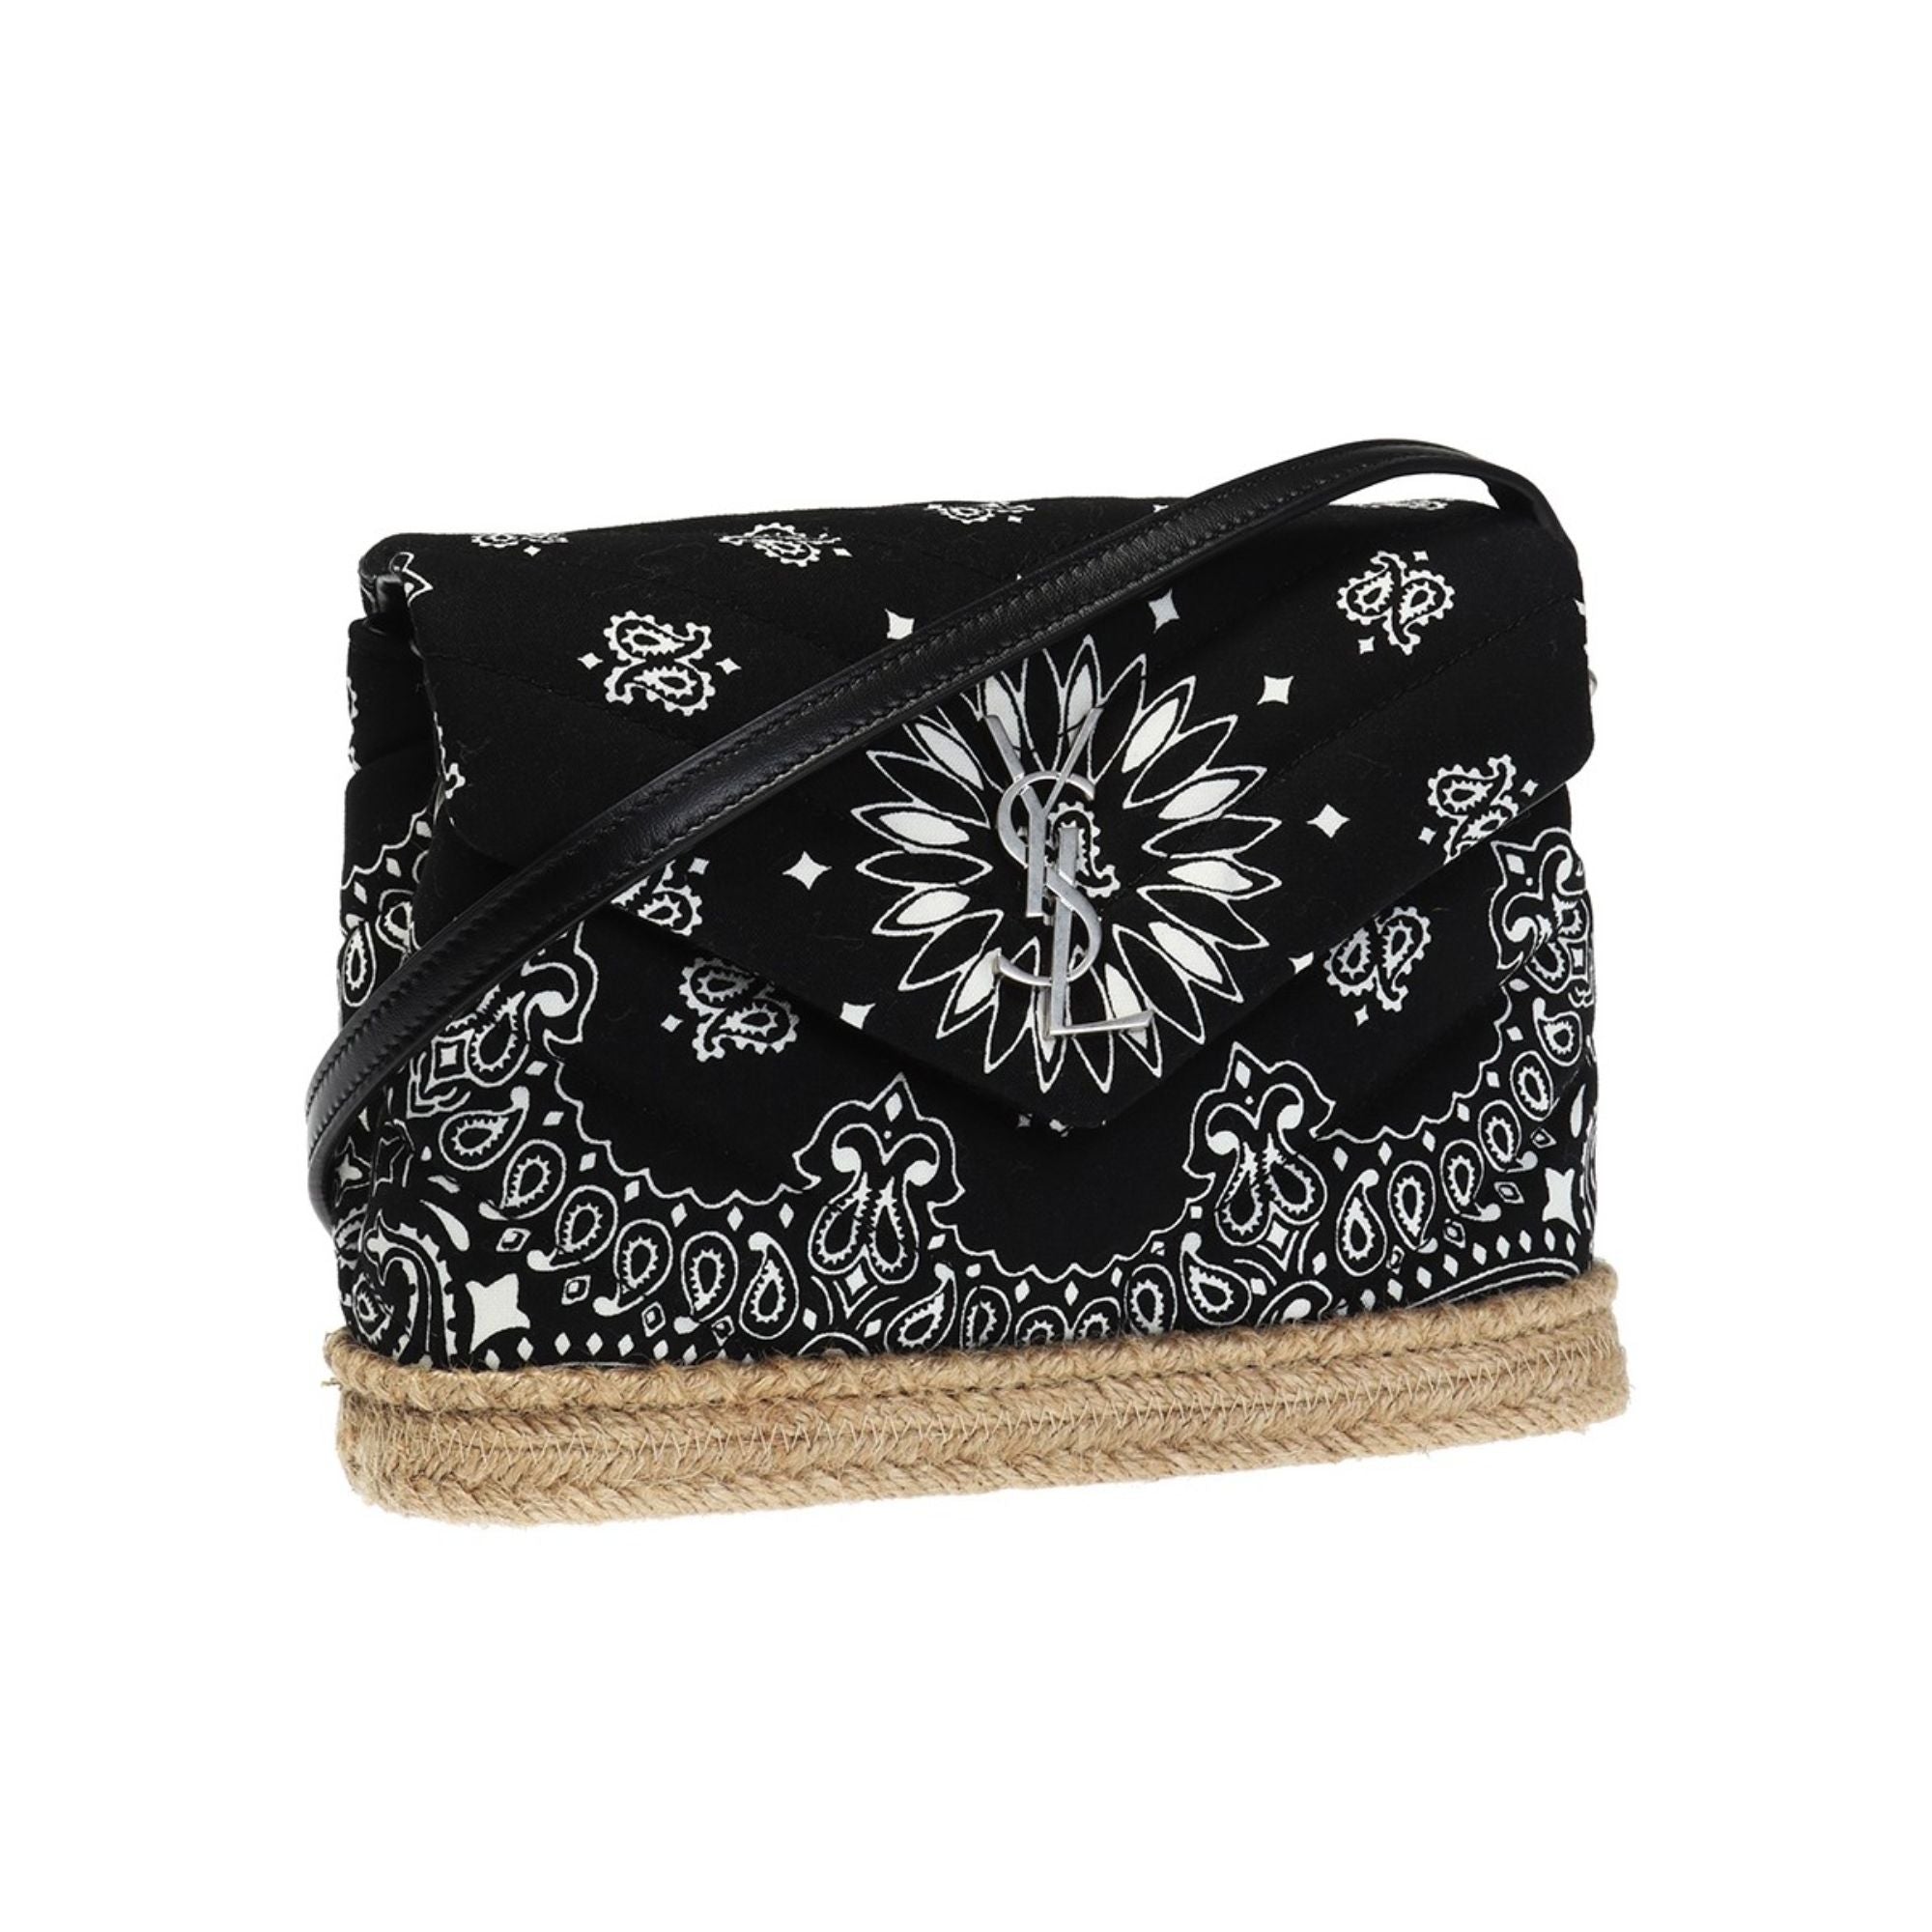 Saint Laurent Loulou Black Paisley Quilted Small Cross Body Bag 531045